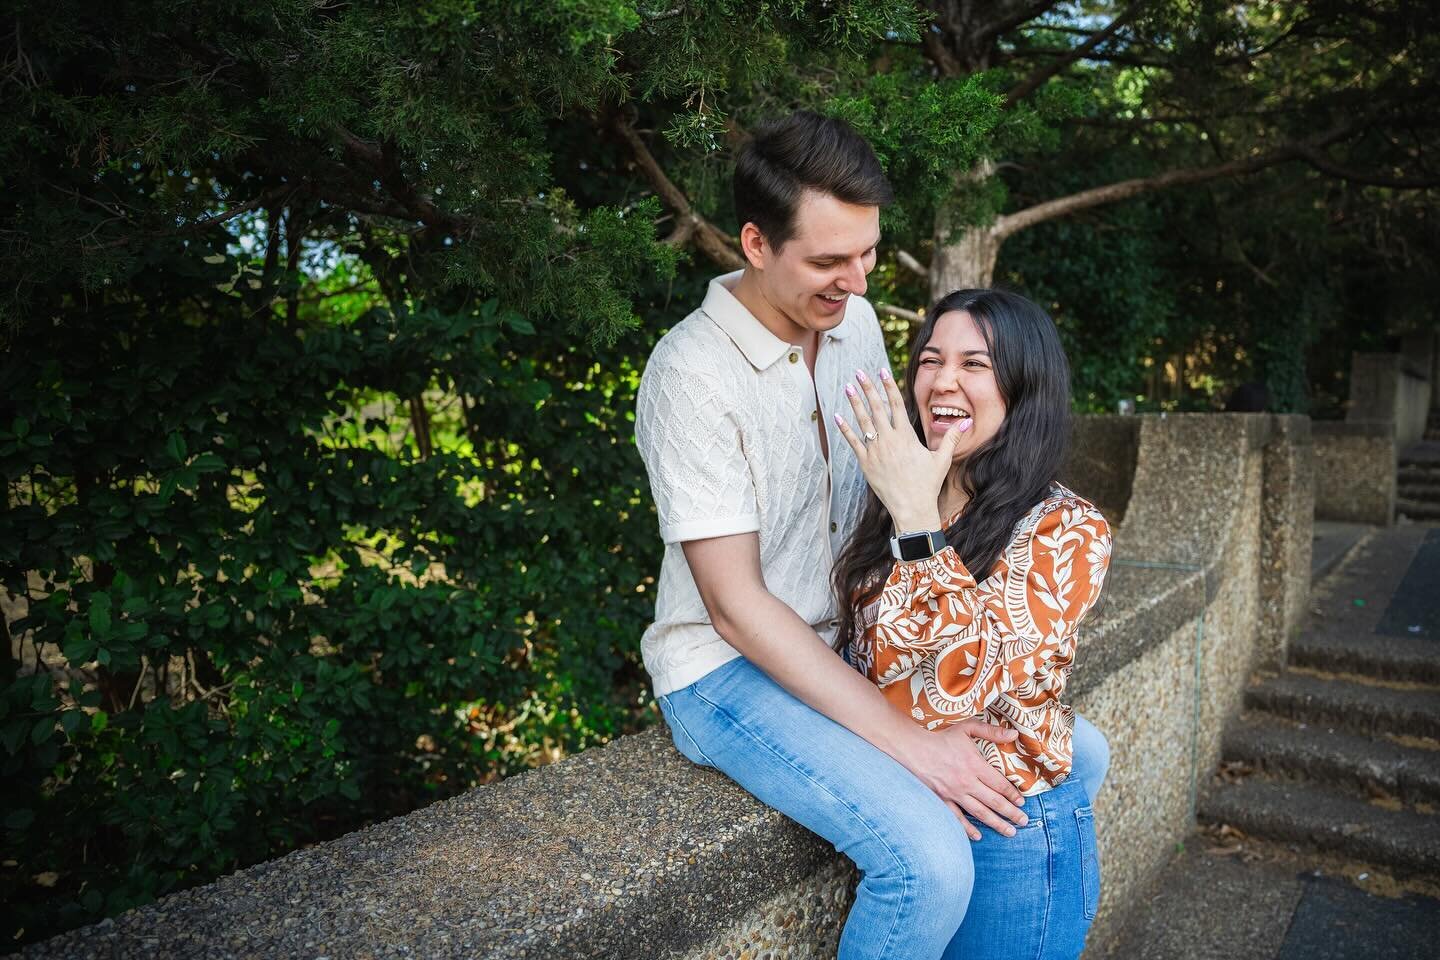 A surprise proposal at Meridian Hill Park in Washington, DC right under the cherry blossoms! ❤️🌸

#jsasuphotography 

#surpriseproposal #cherryblossom #surpriseengagement #engagementring #engagementphotos #engagementrings #engagementphotos #proposal